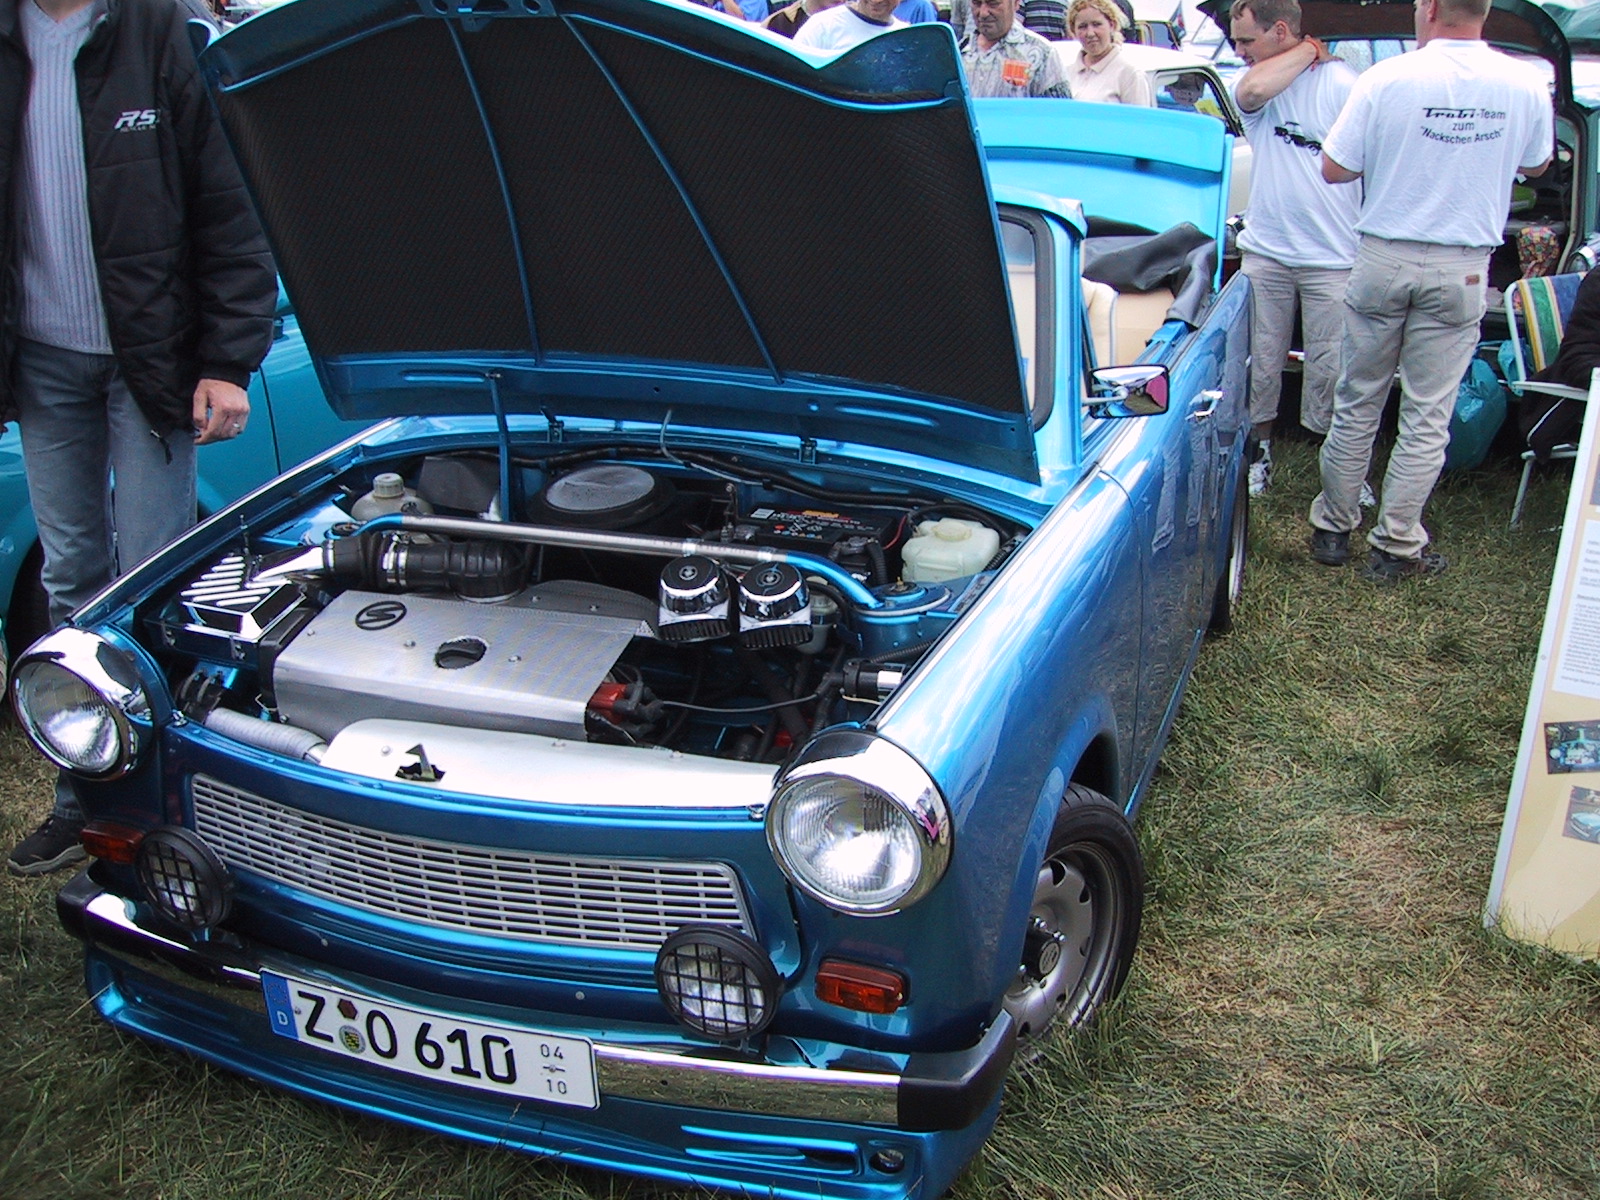 Trabant 601 Tuning Photo 01  Car in pictures - car photo gallery